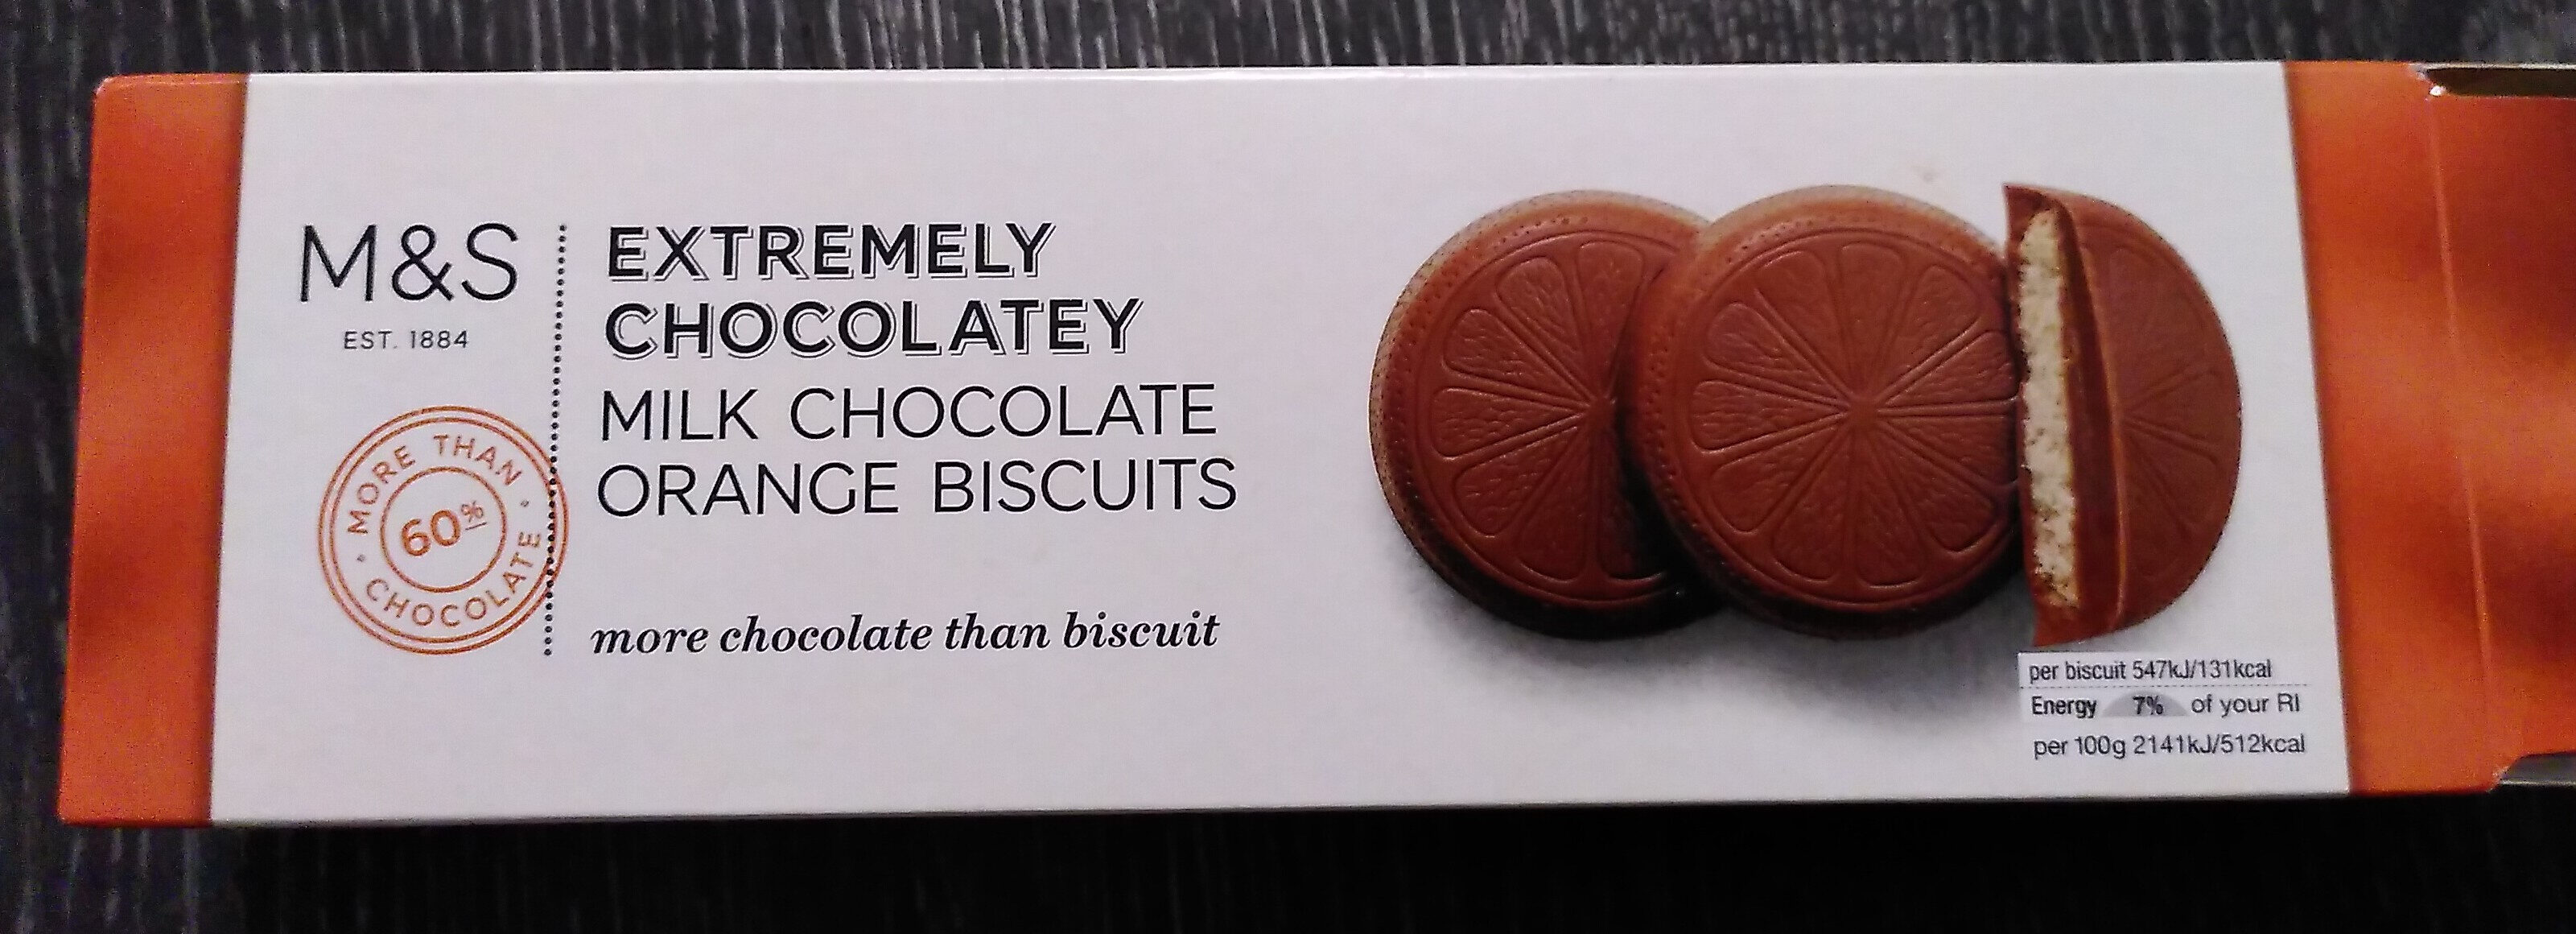 Extremely Chocolatey Milk Chocolate Orange Biscuits - Product